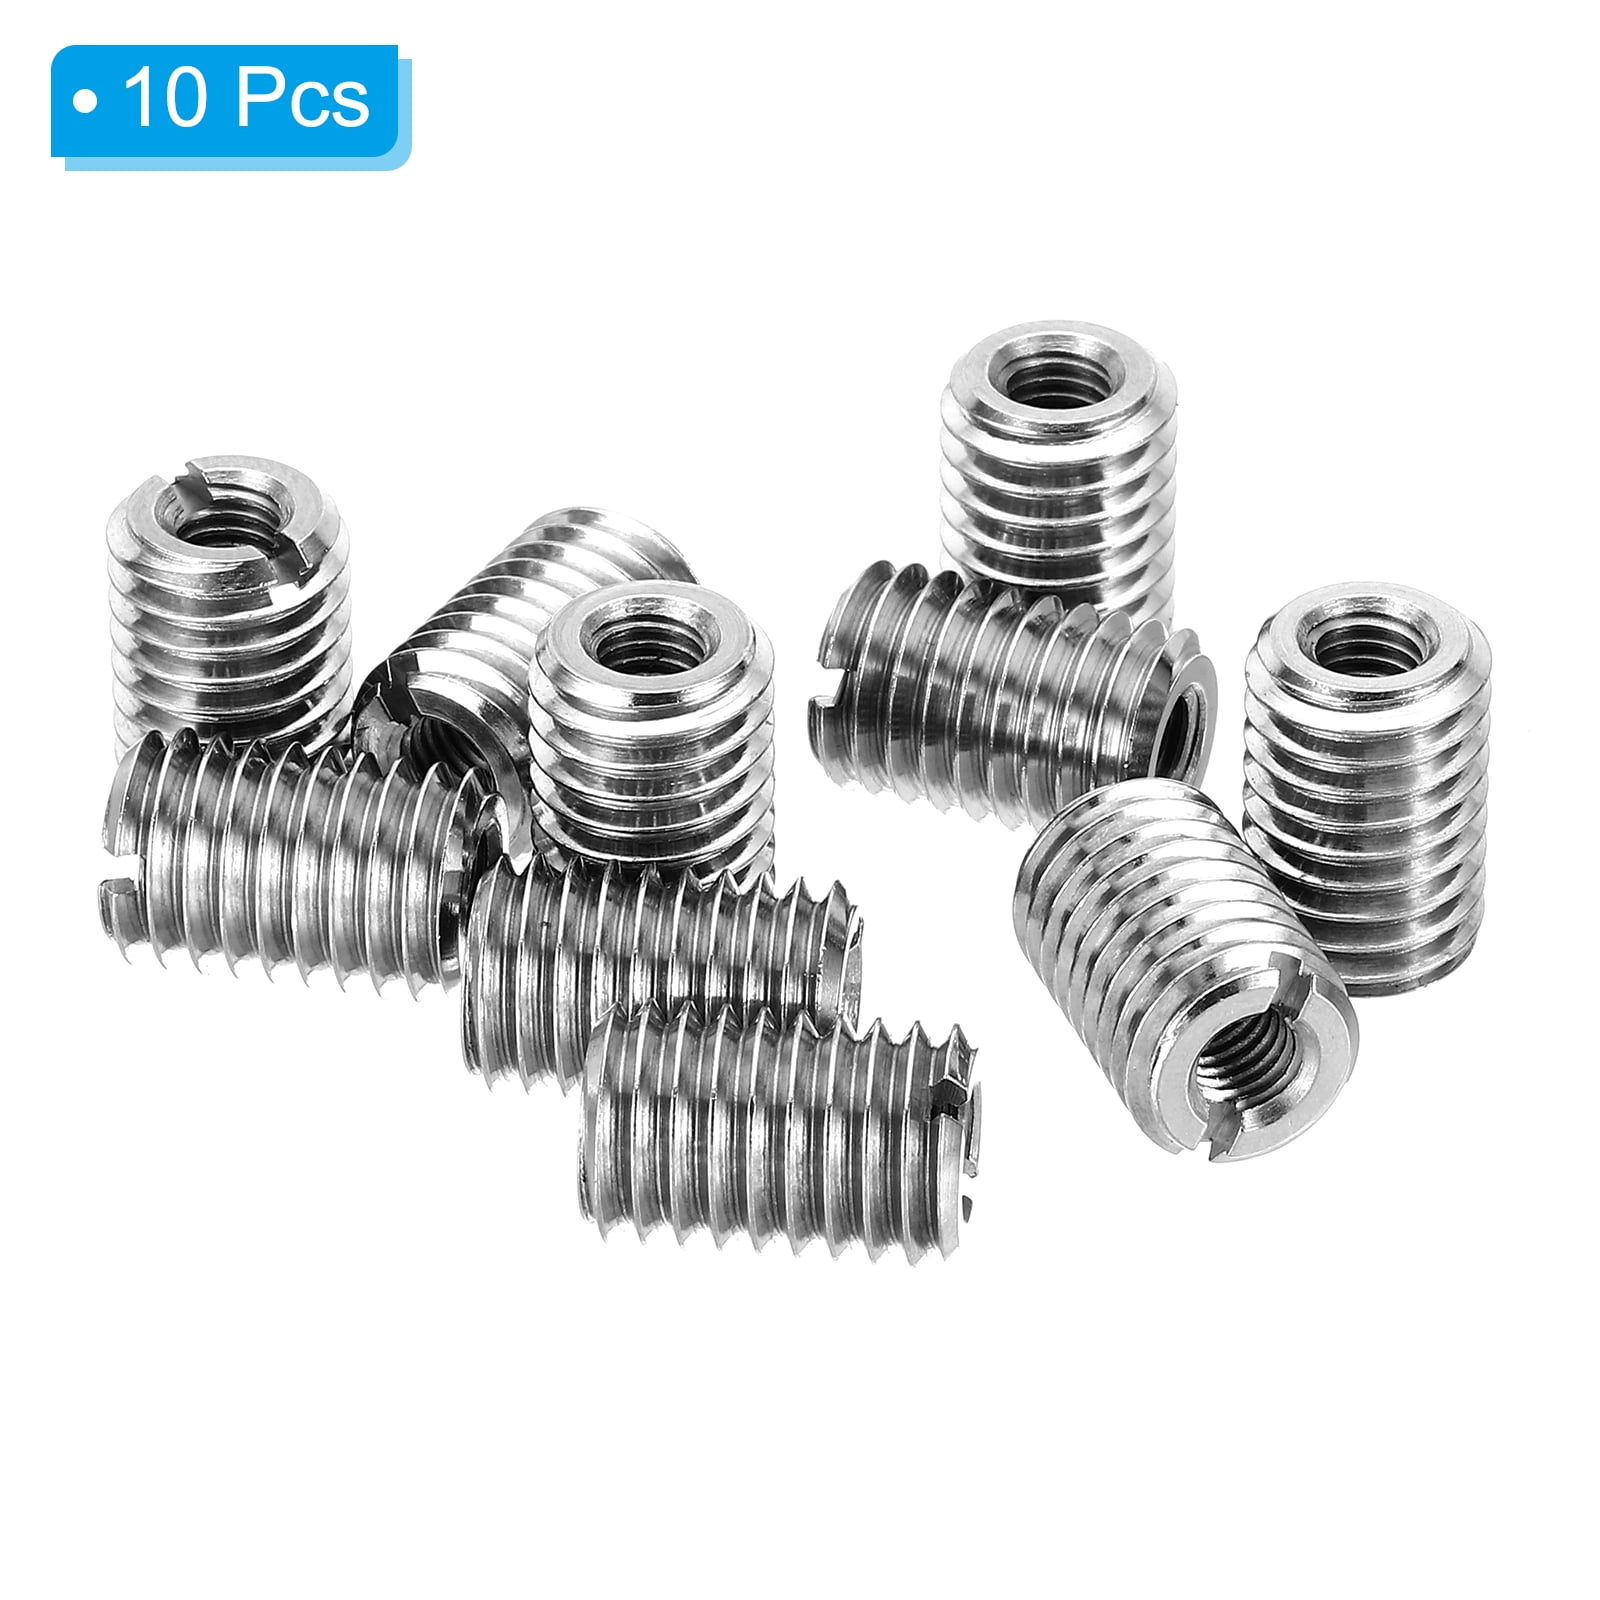 Uxcell Thread Adapters Sleeve Reducing Nut M10*1.5 Male to M5*0.8